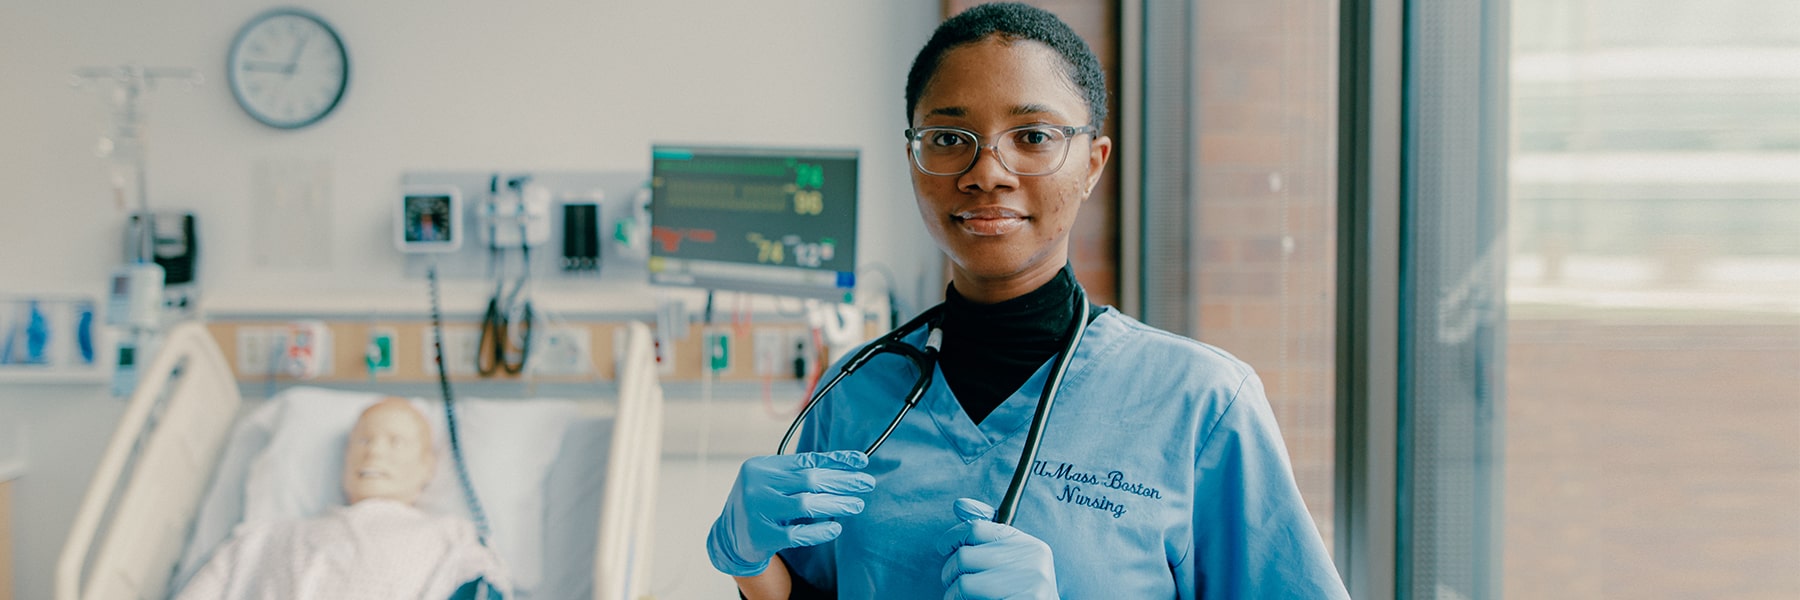 Student nurse in scrubs stands in simulation lab.